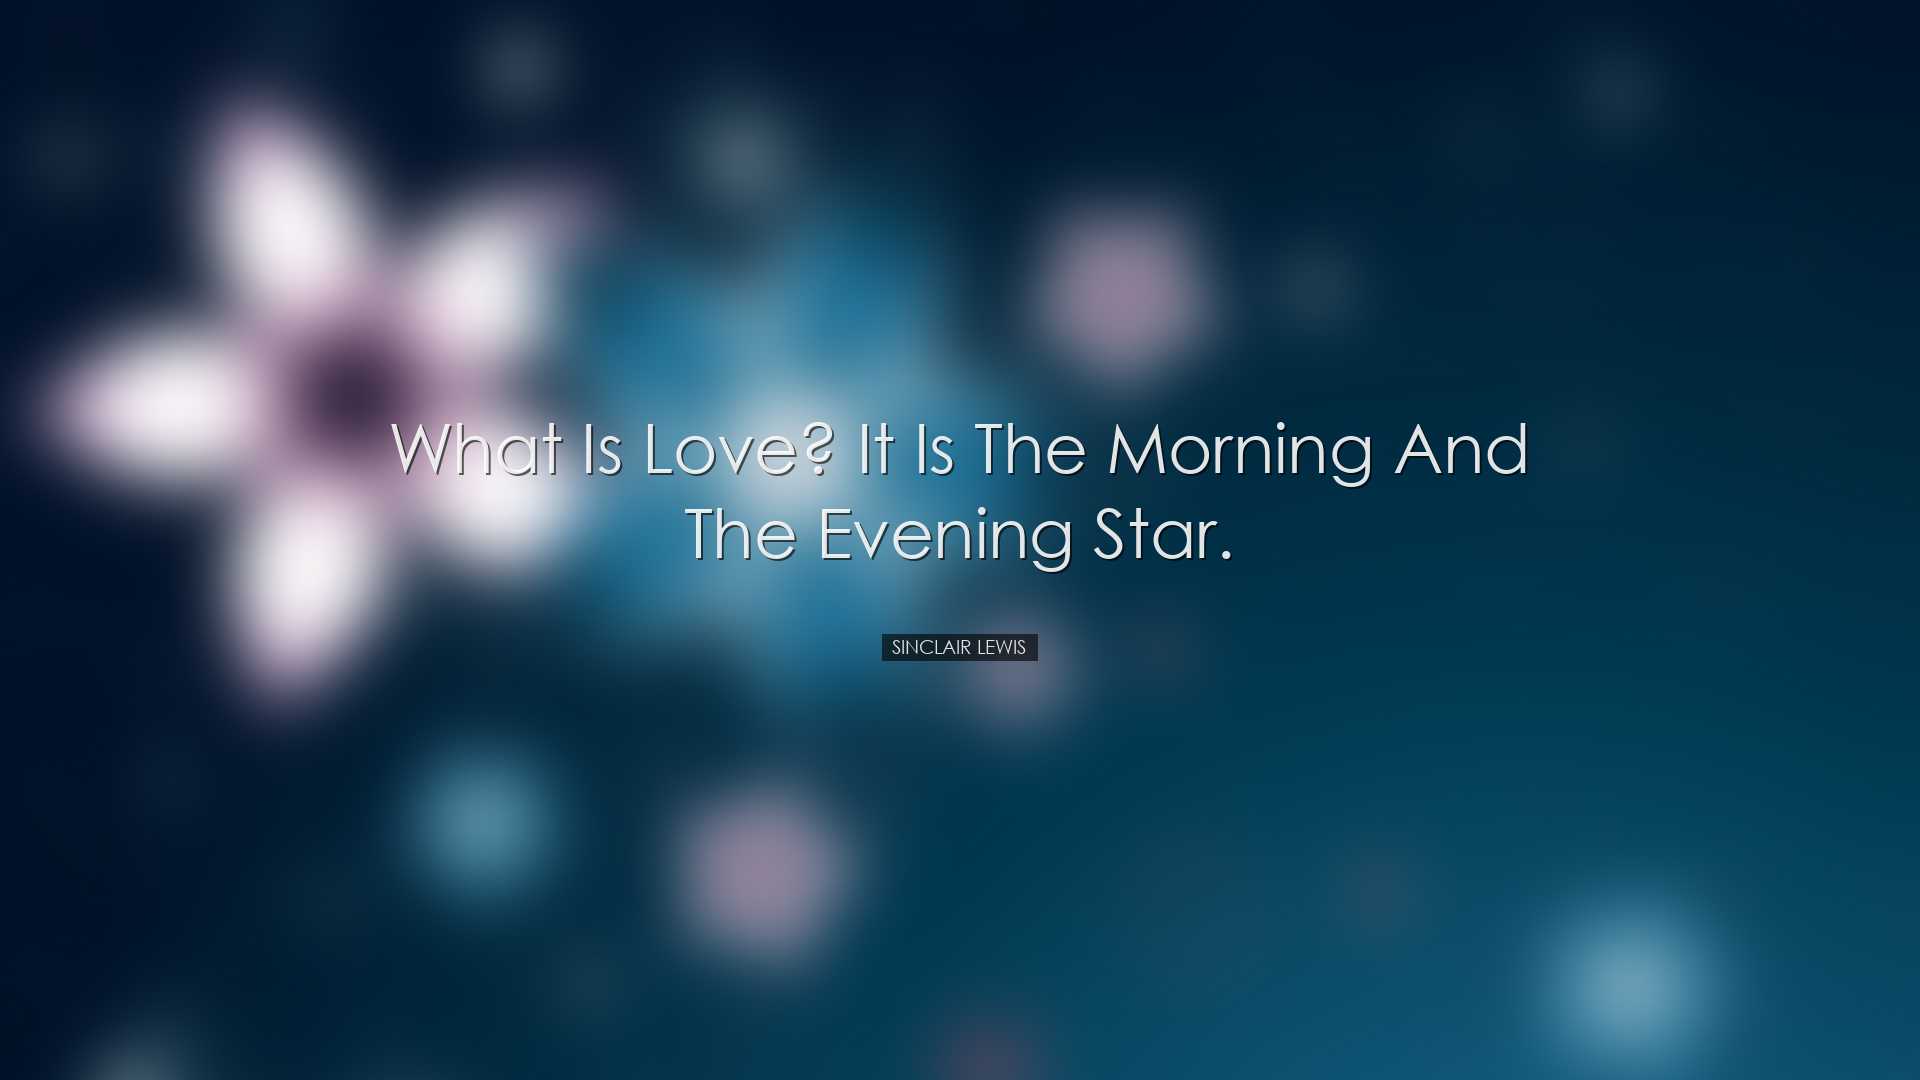 What is love? It is the morning and the evening star. - Sinclair L